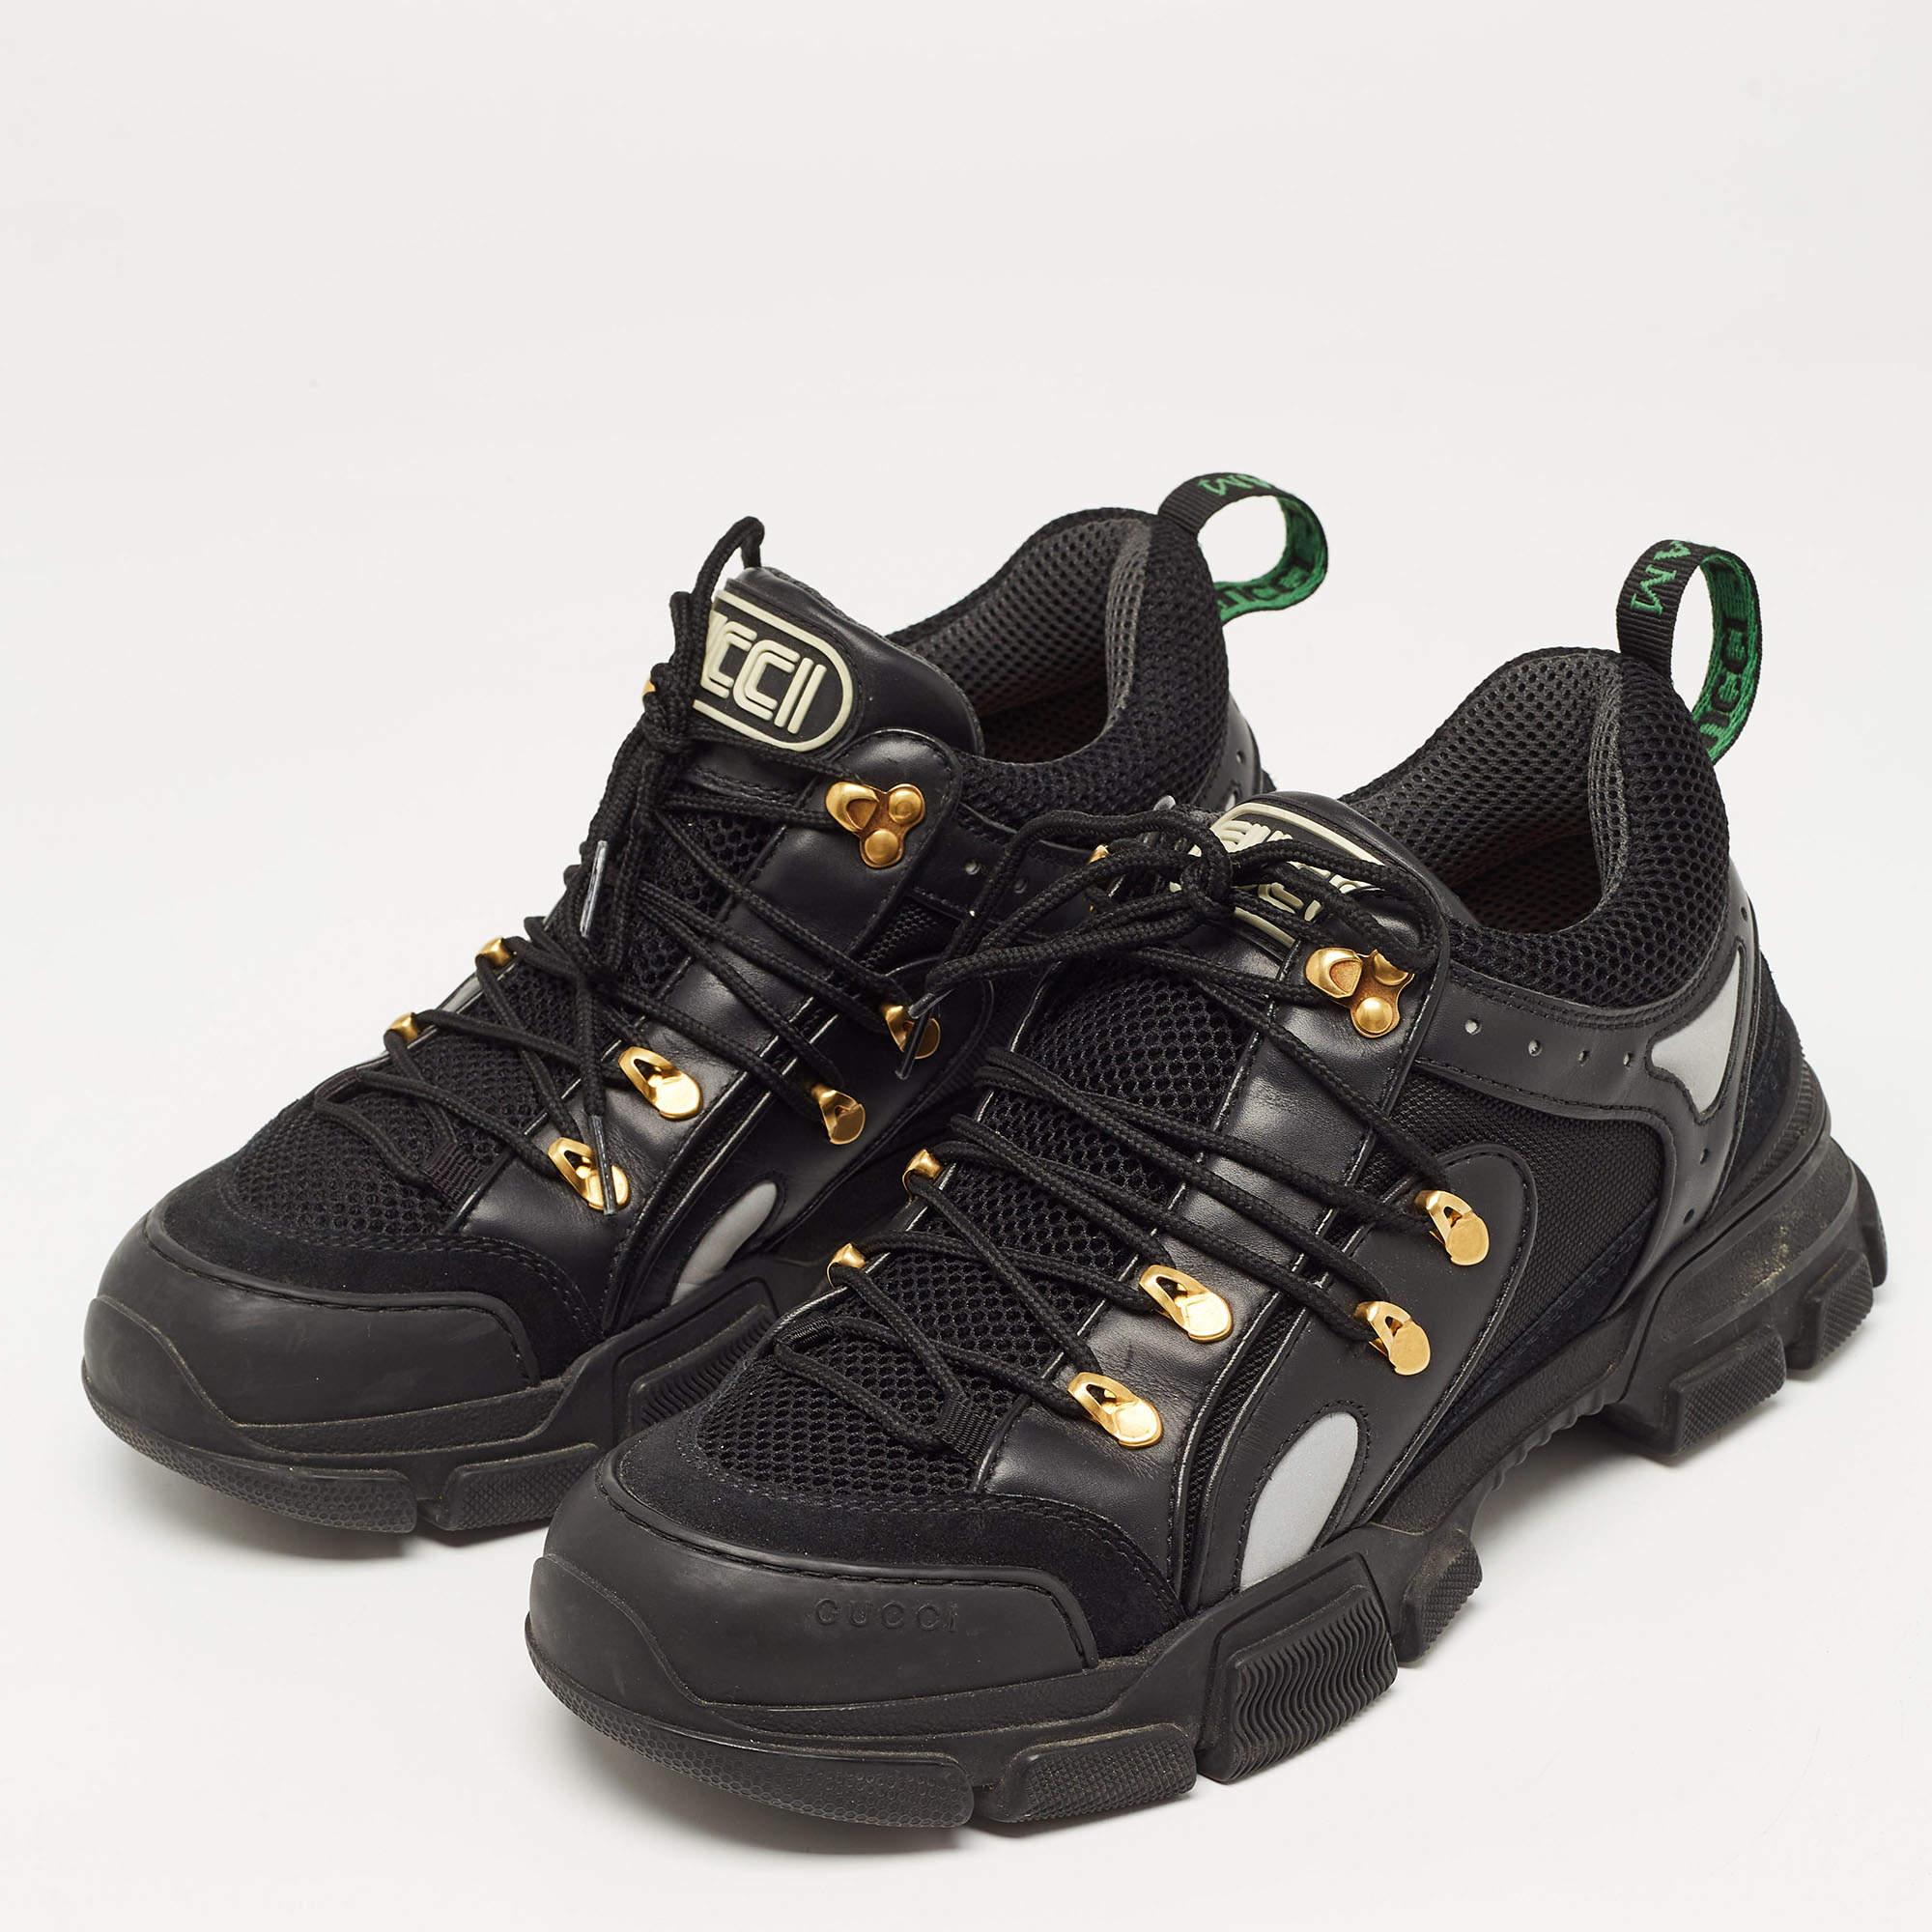 Black Leather and Mesh Flashtrek Sneakers Size 43.5 6